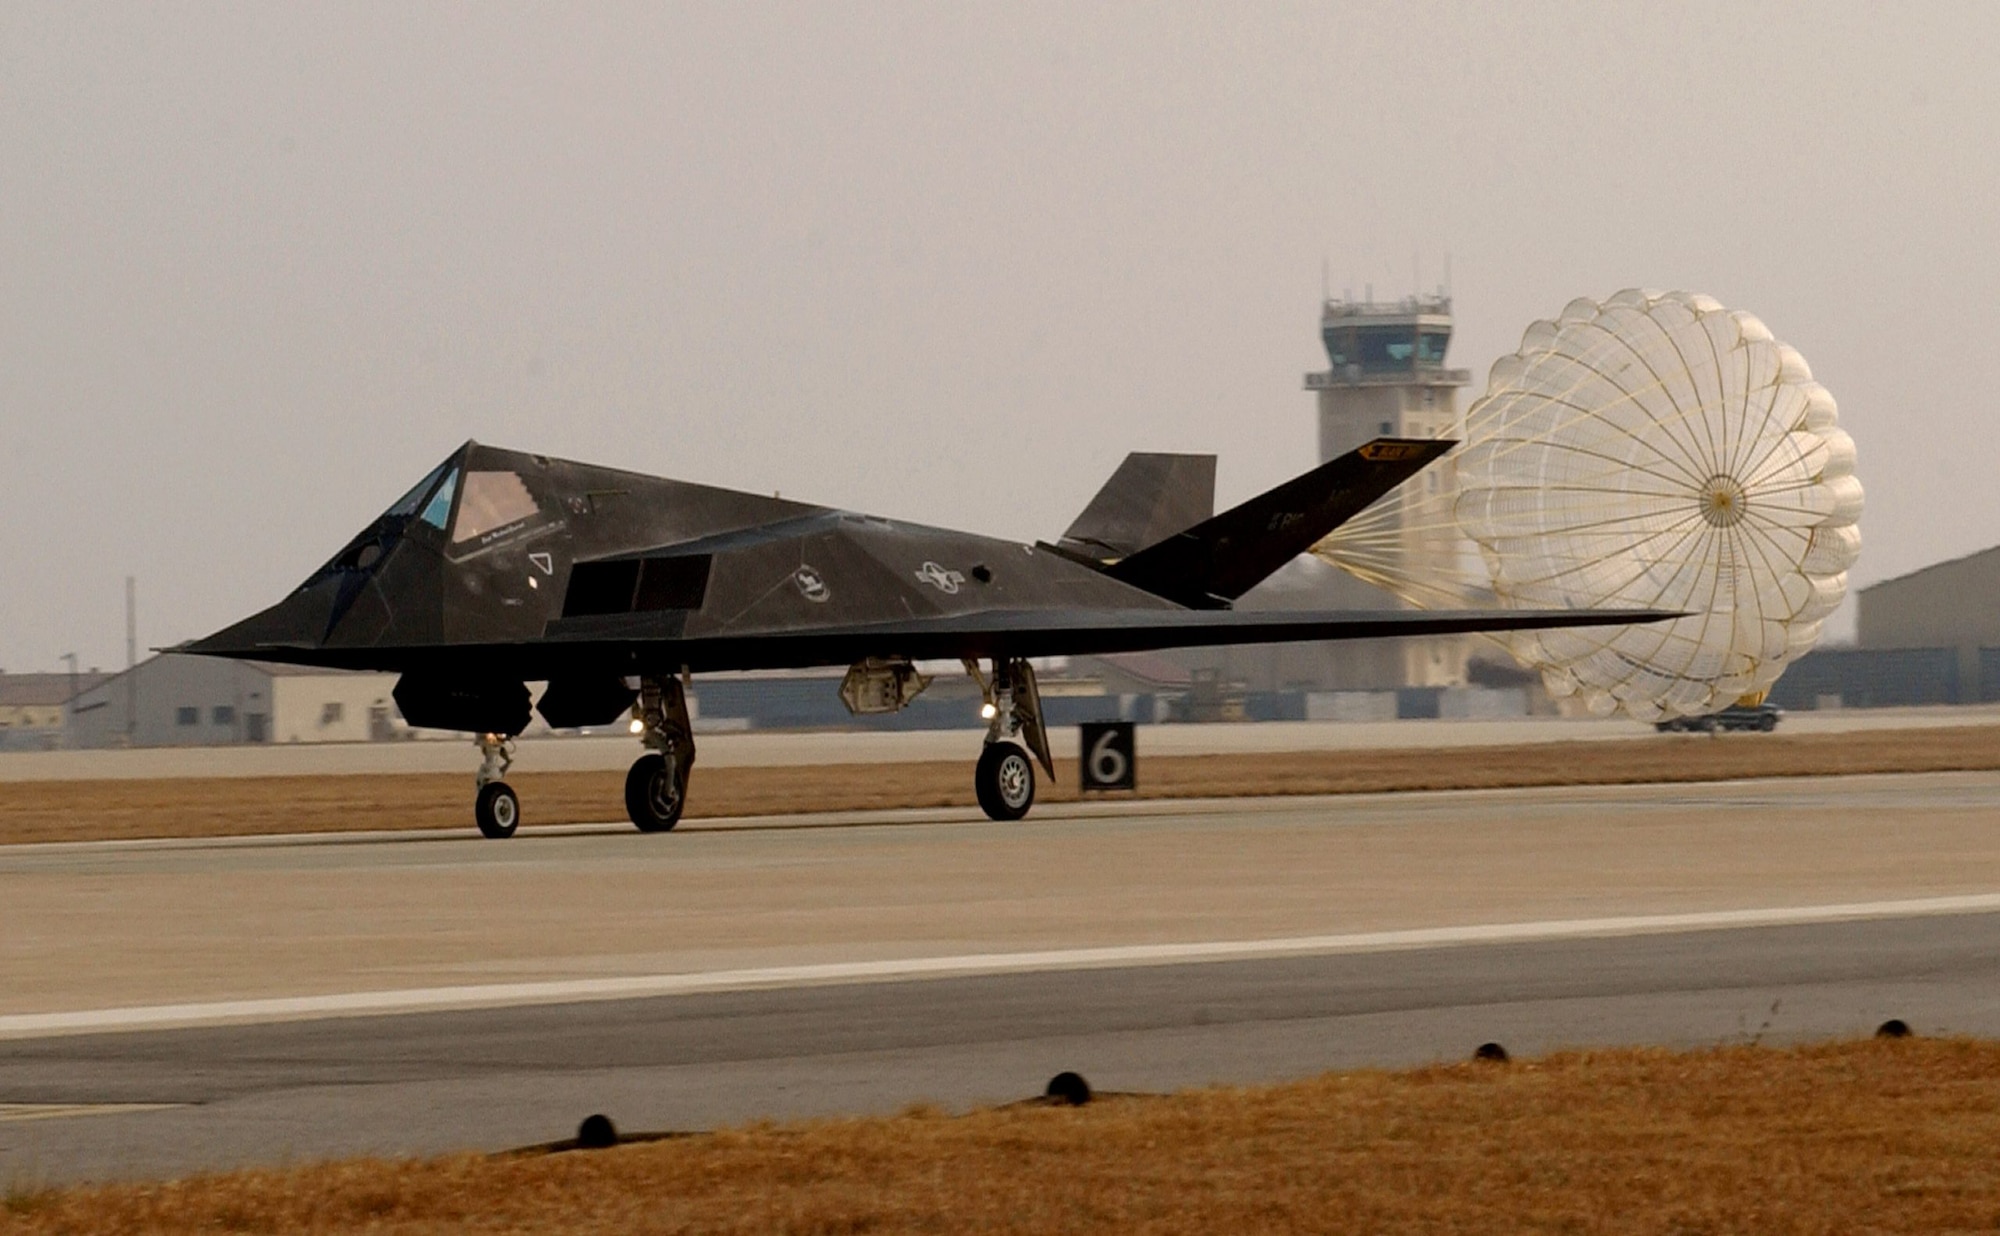 An F-117 Nighthawk taxies down the runway after landing Jan. 11 at Kunsan Air Base, Republic of Korea. A squadron of F-117s, together with 300 Airmen, have deployed here in support of a continuing force posture adjustment throughout the Pacific. The aircraft, assigned to the 9th Expeditionary Fighter Squadron, is part of the third squadron of Kunsan AB’s host unit, the 8th Fighter Wing, during the deployment’s duration.